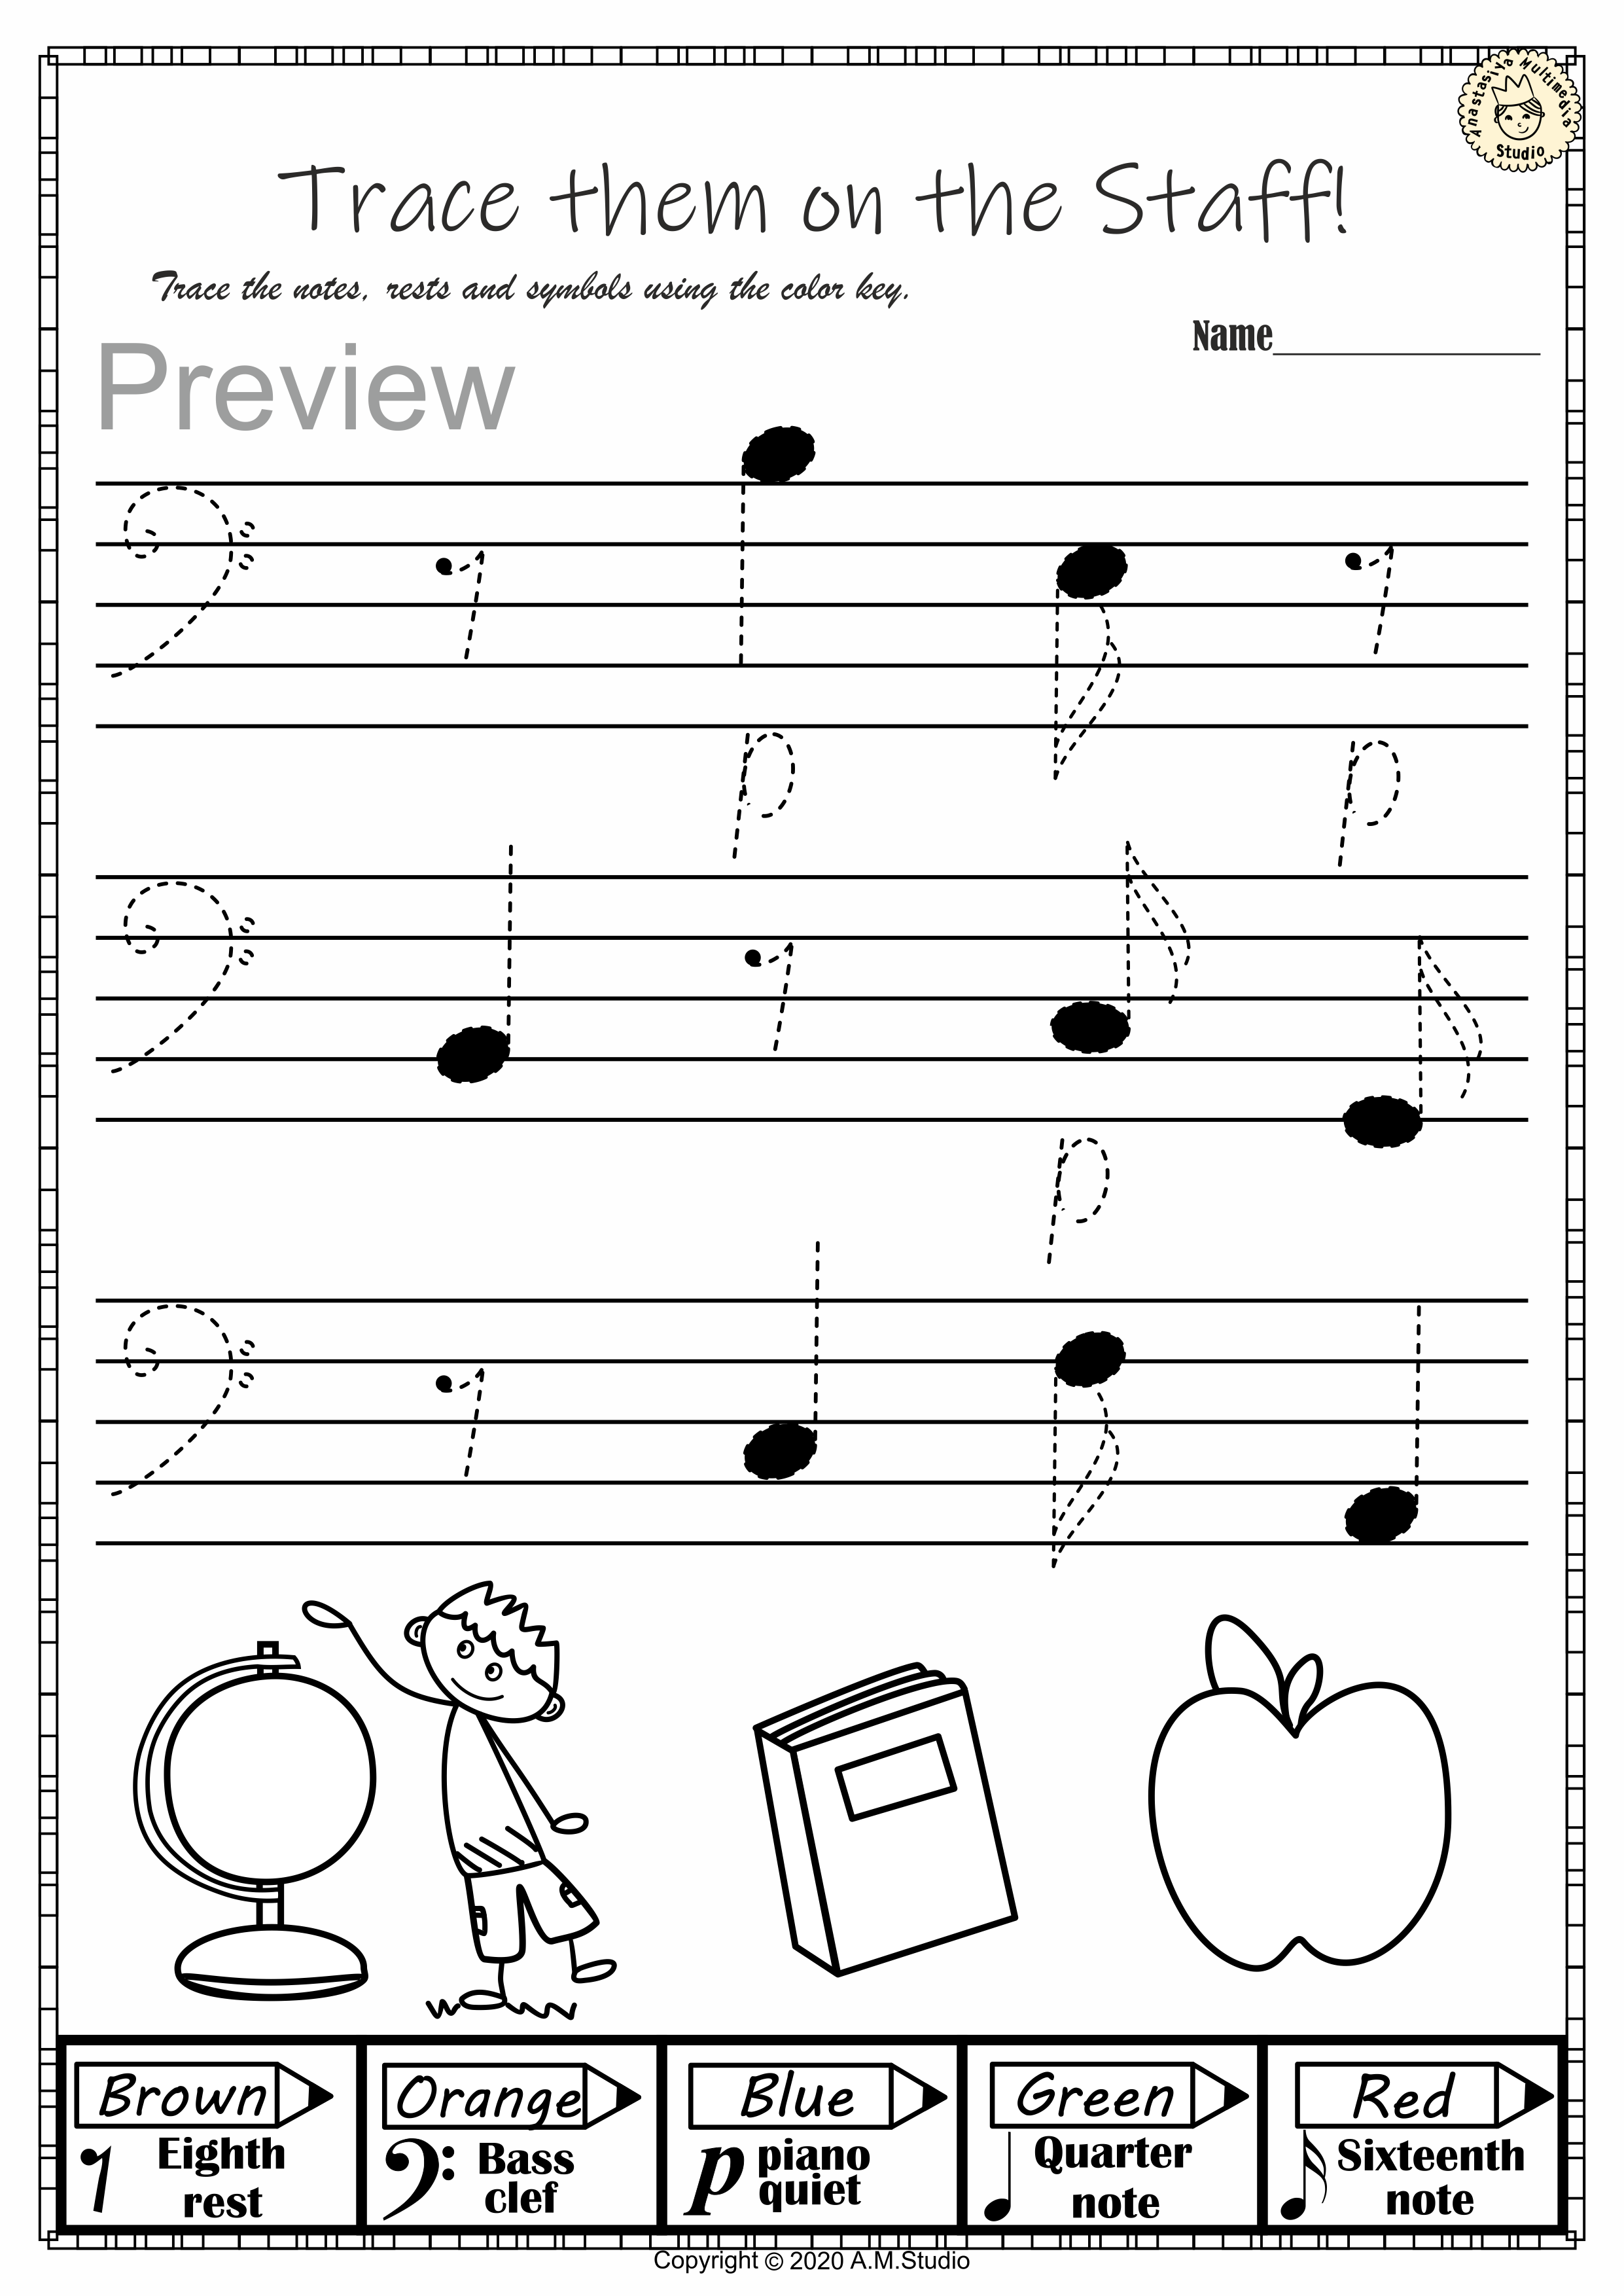 Back to School Trace and Color Music Pages #2 (img # 4)